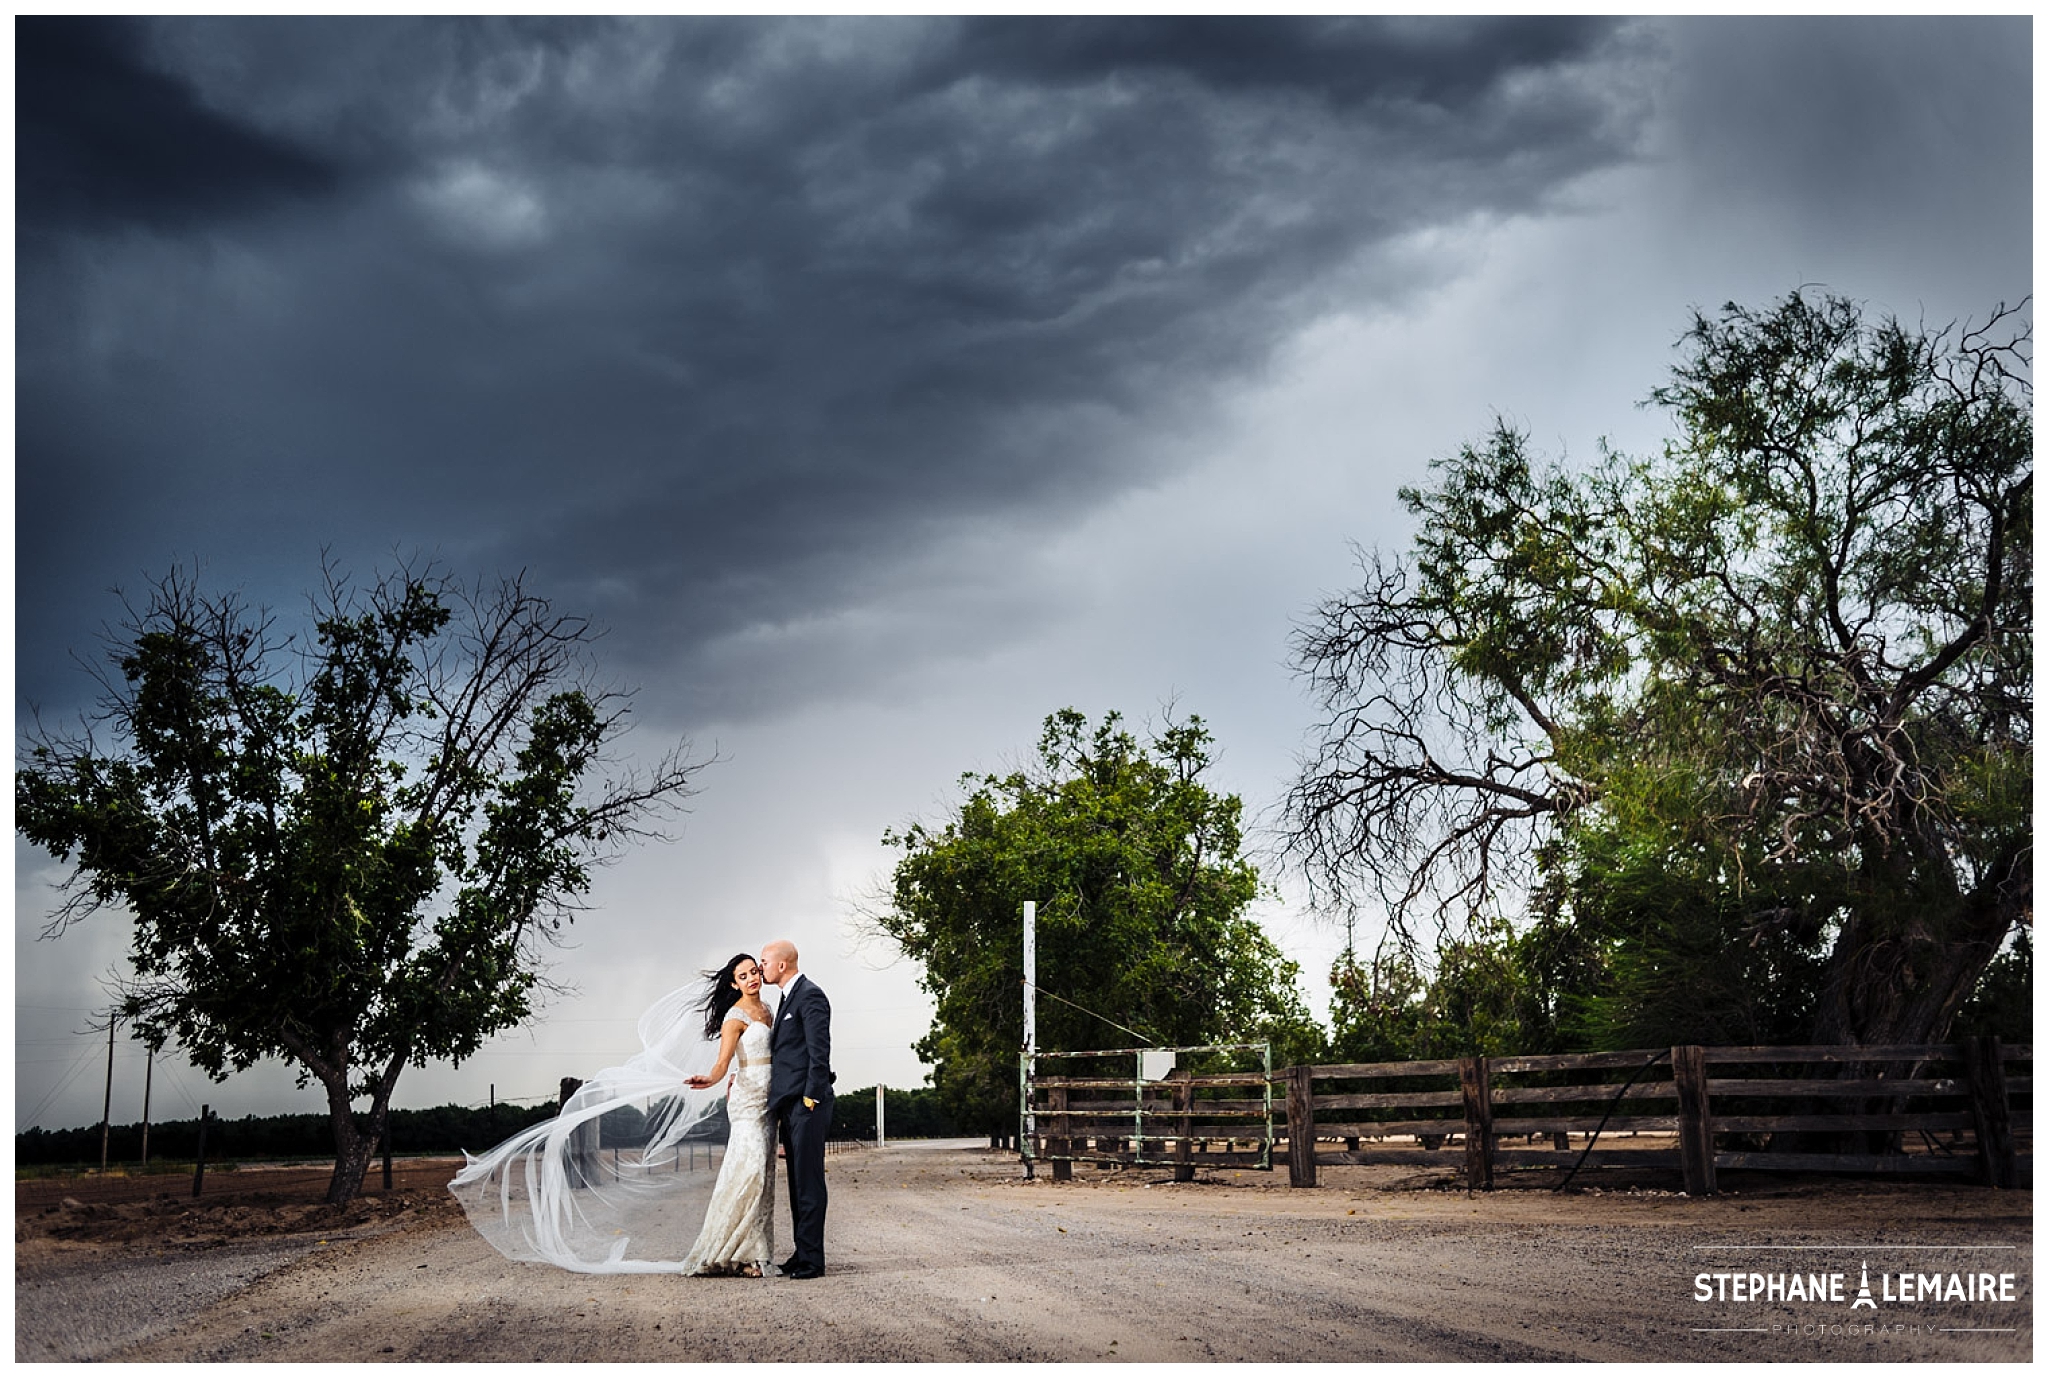 Bride and Groom portraits on a  farm with stormy sky